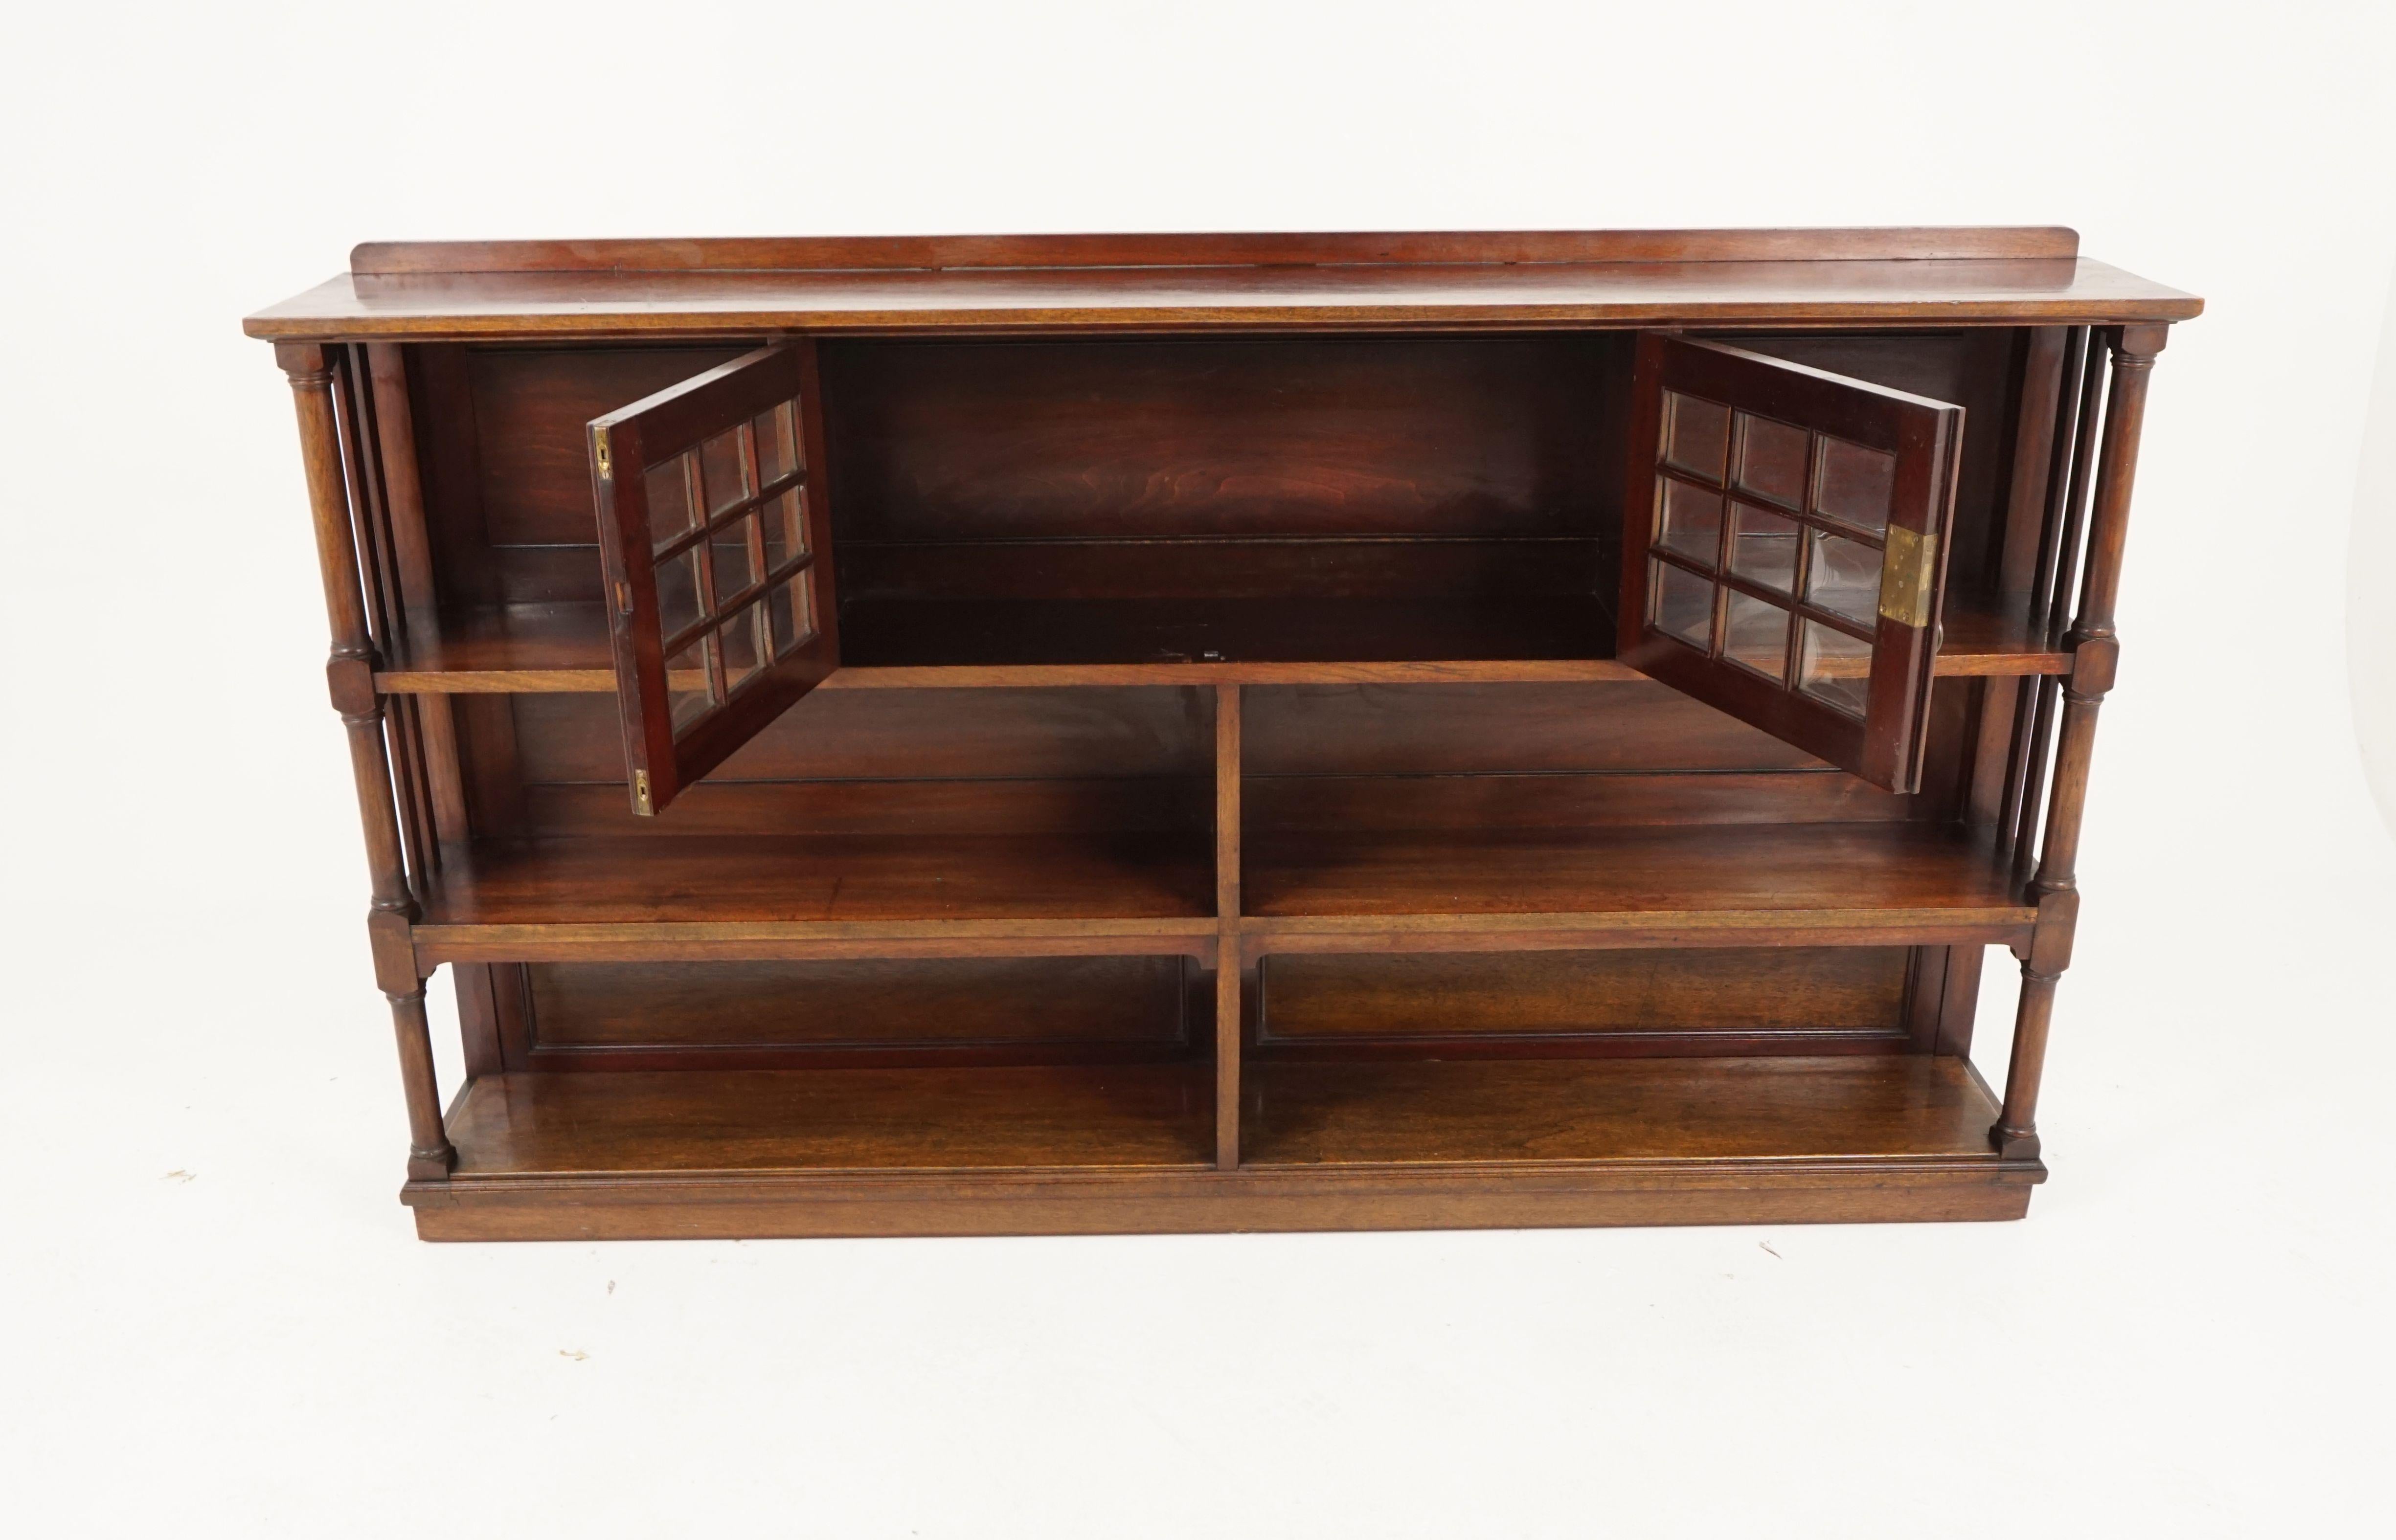 Antique Walnut display cabinet, open bookcase, Scotland 1910, B2255

Scotland, 1910
Solid Walnut 
Original finish
Short pediment on top
Rectangular cornice
Pair of convex glass doors
Flanked by a two short open shelves on top
Four open shelves